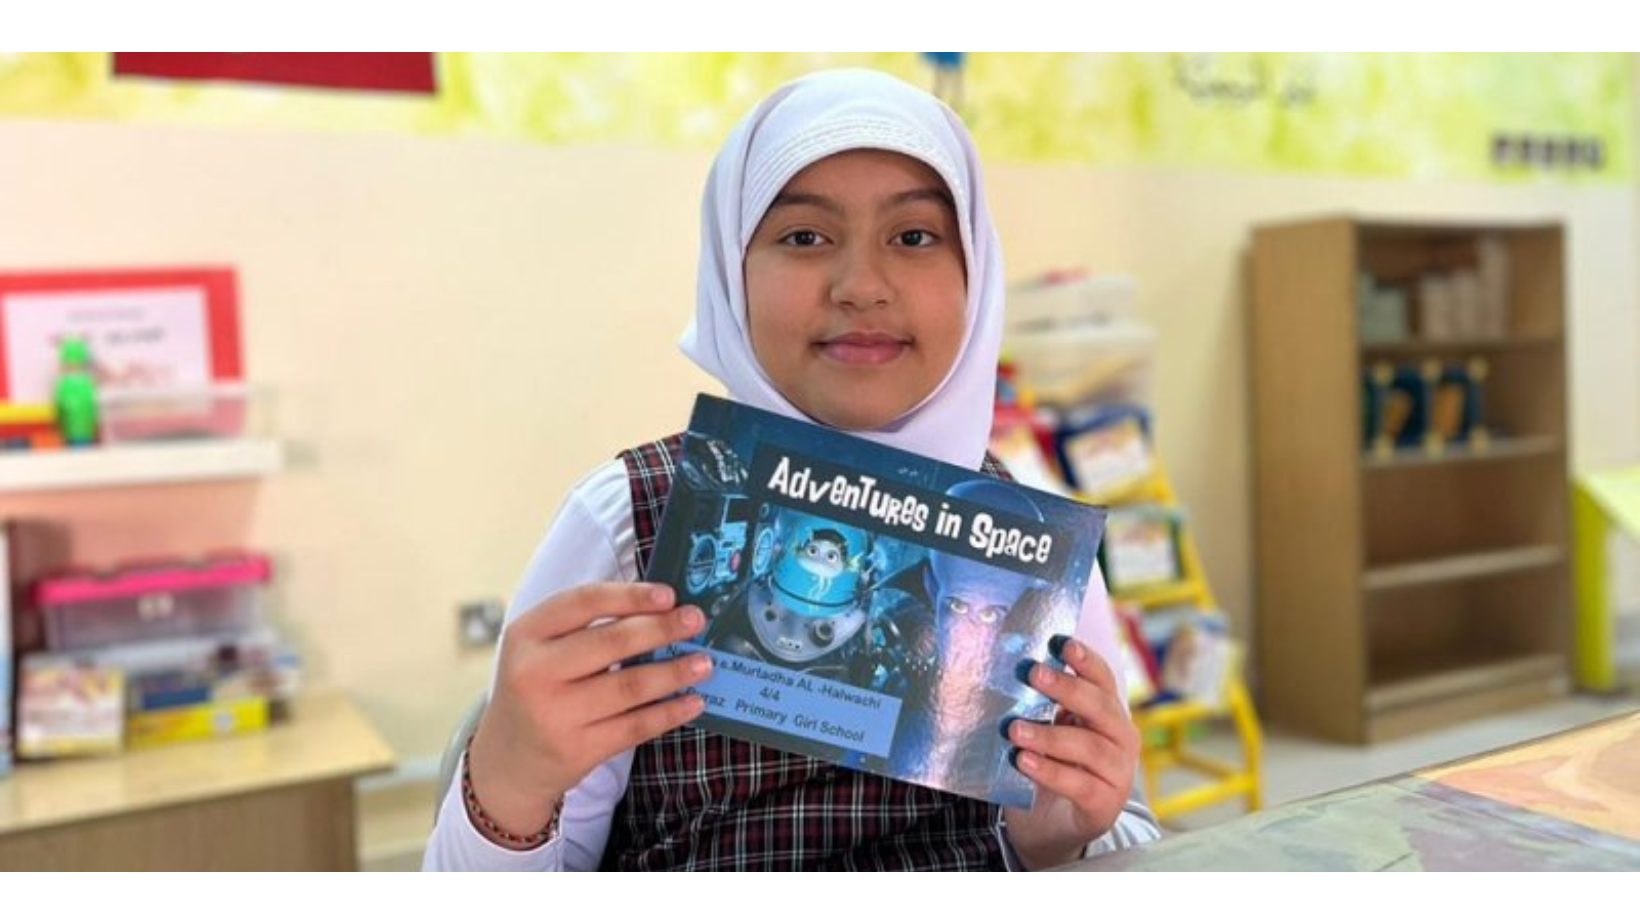 Nawraa Sayed Mortada young author in Bahrain published Adventures in Space